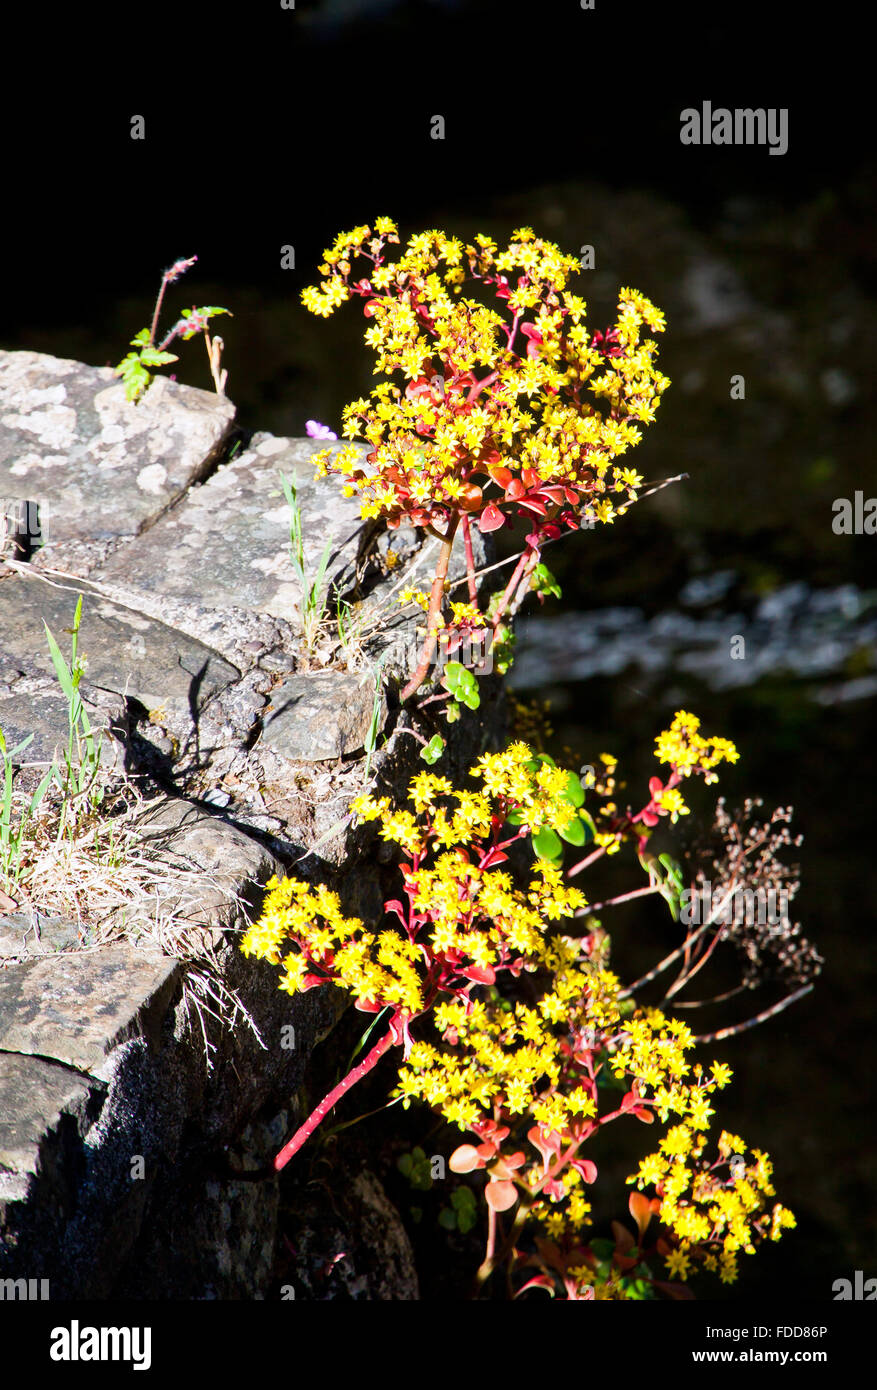 Small yellow flowers growing through a stones Stock Photo